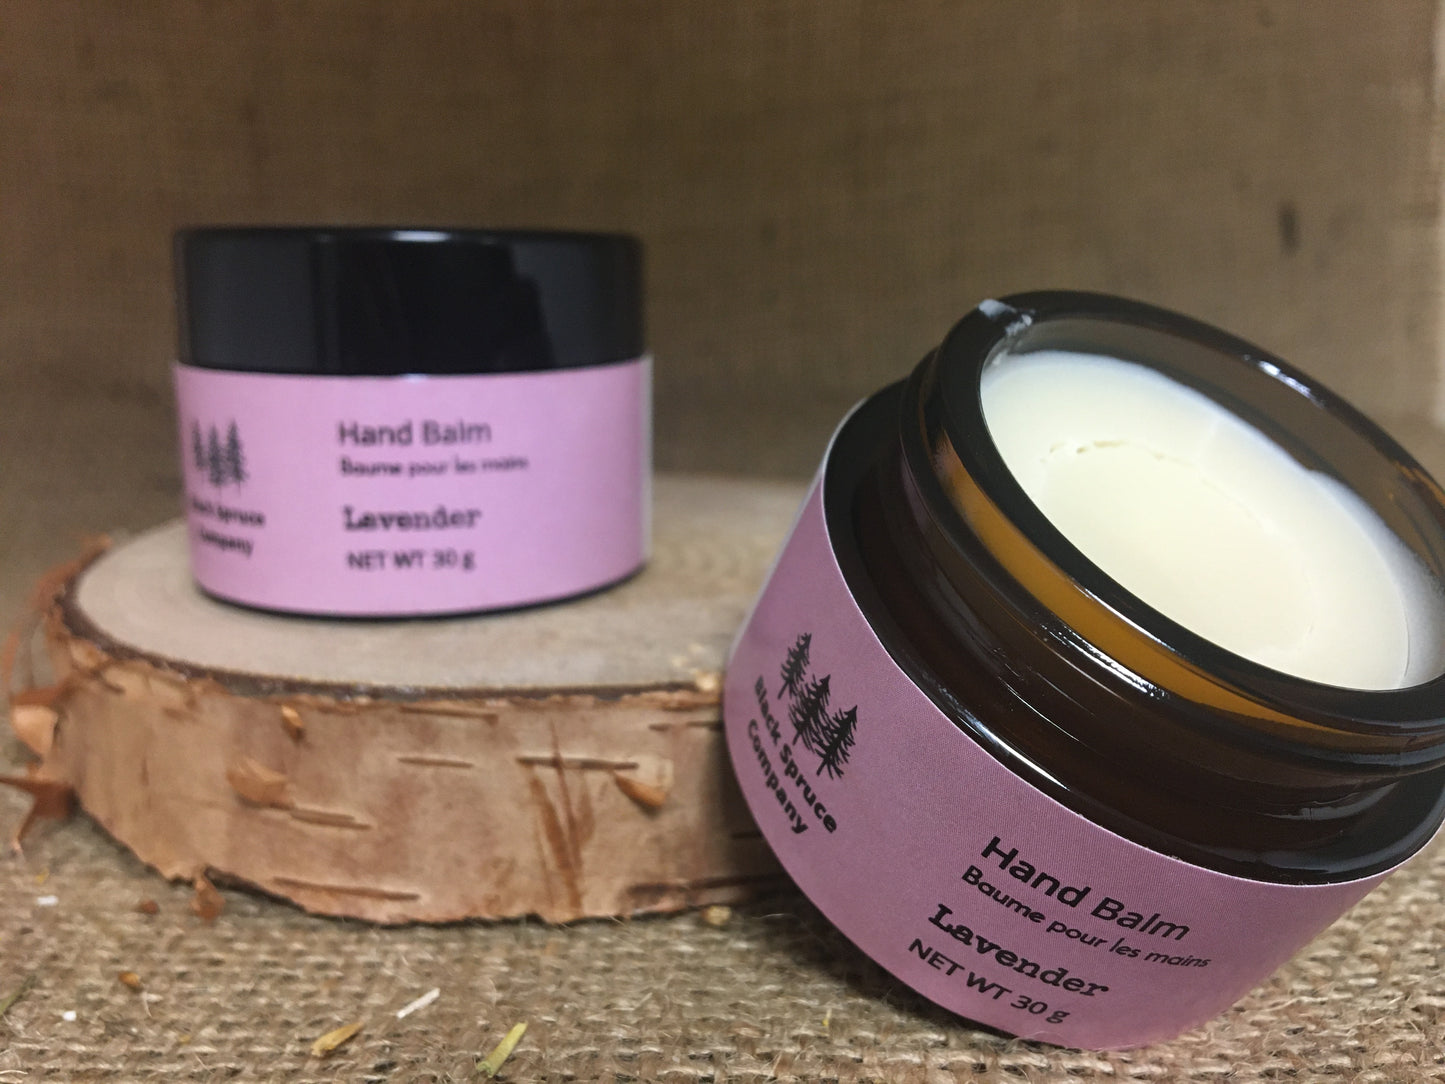 Lavender Hand Balm with close up of product